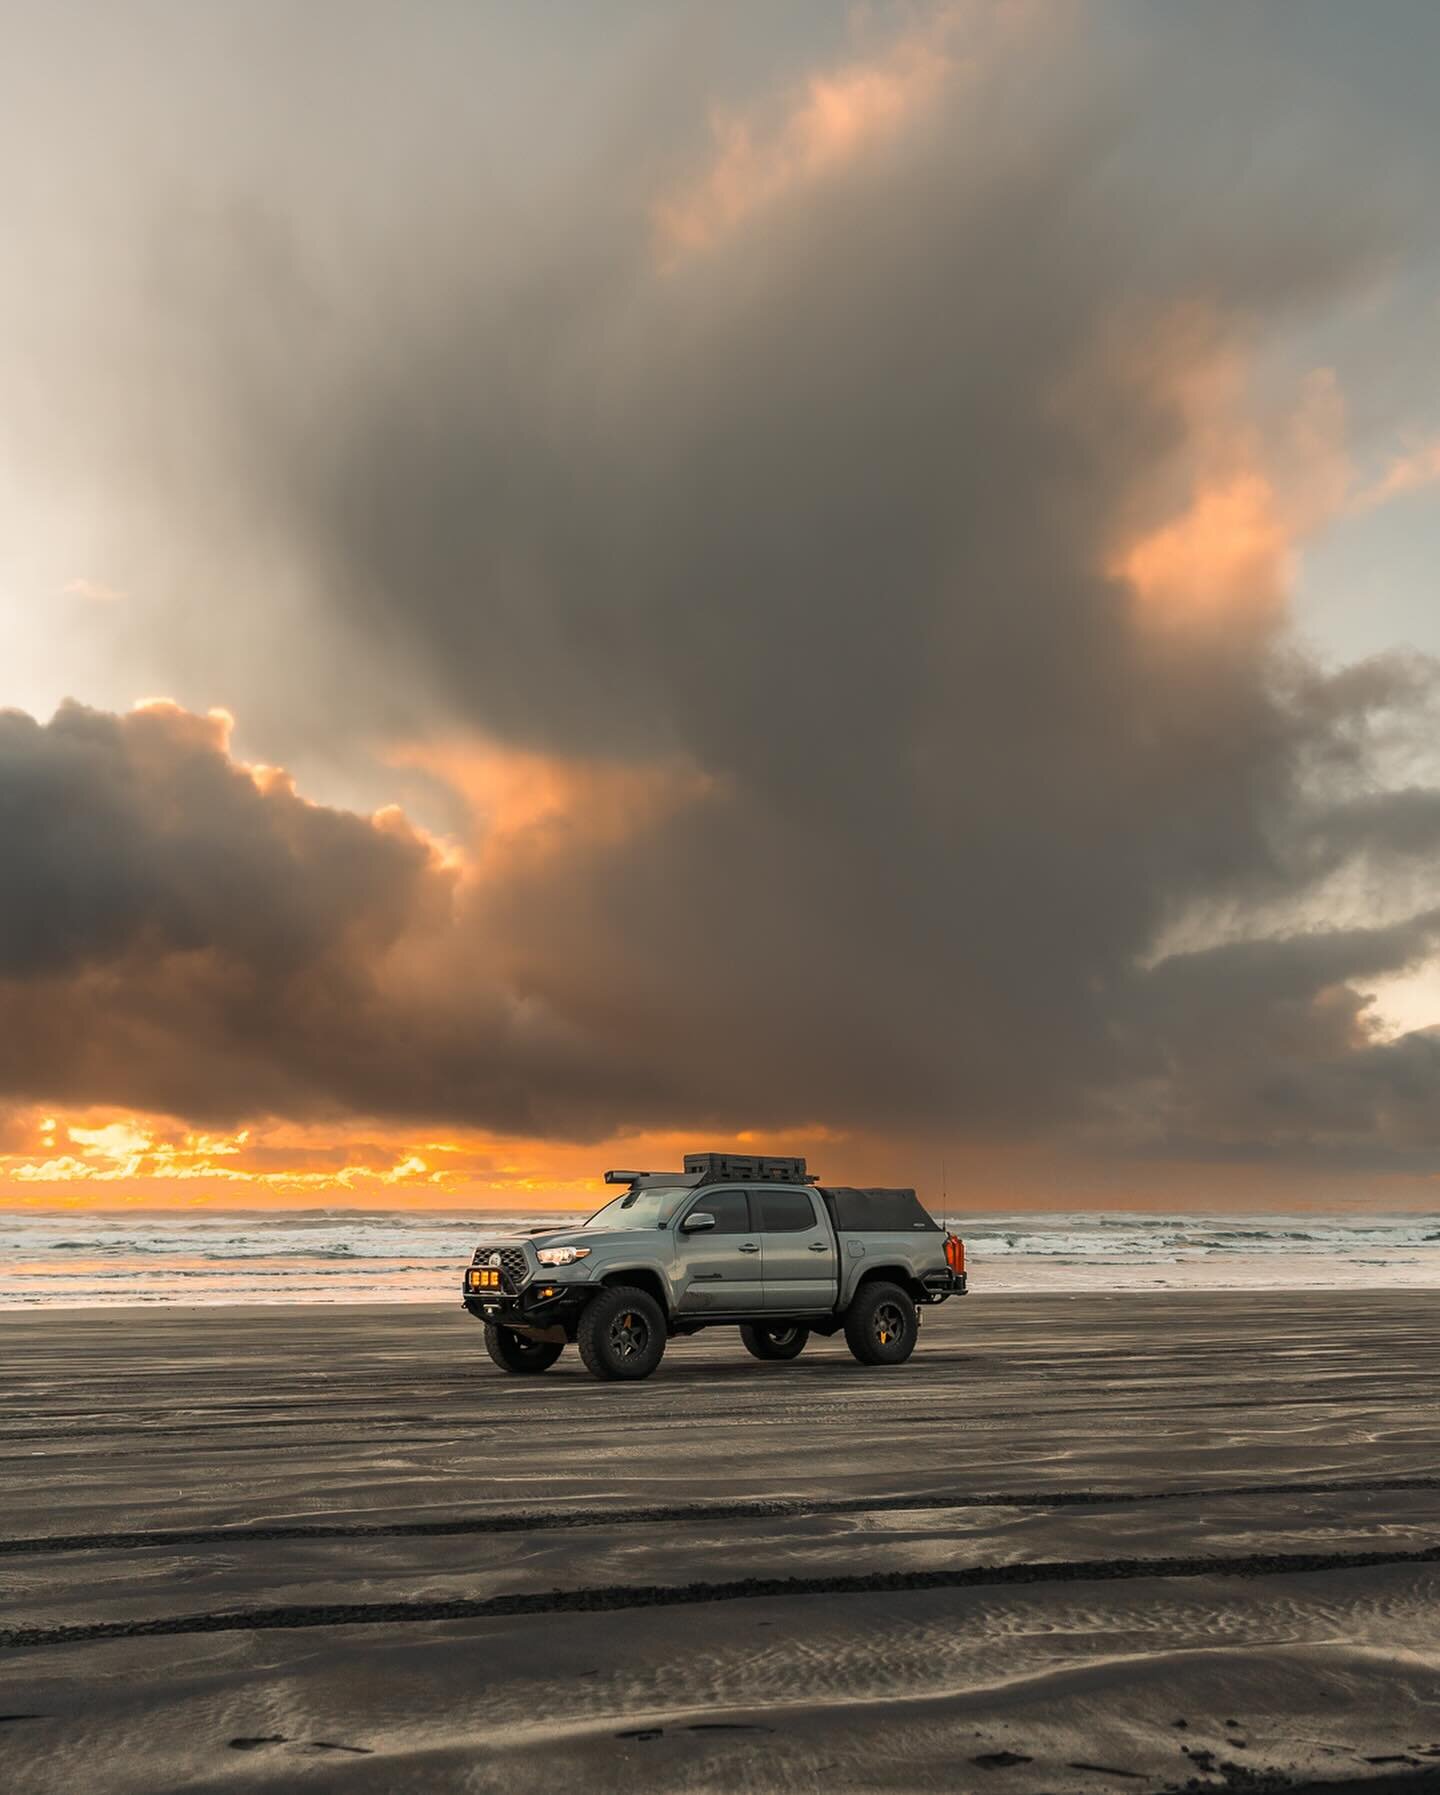 It&rsquo;s flashback Friday, y&rsquo;all.

During our travels last December, we briefly passed through Oregon. We camped at Fort Stevens State Park, drove onto the beach and posed with what&rsquo;s left of the Peter Iredale during the type of sunset 